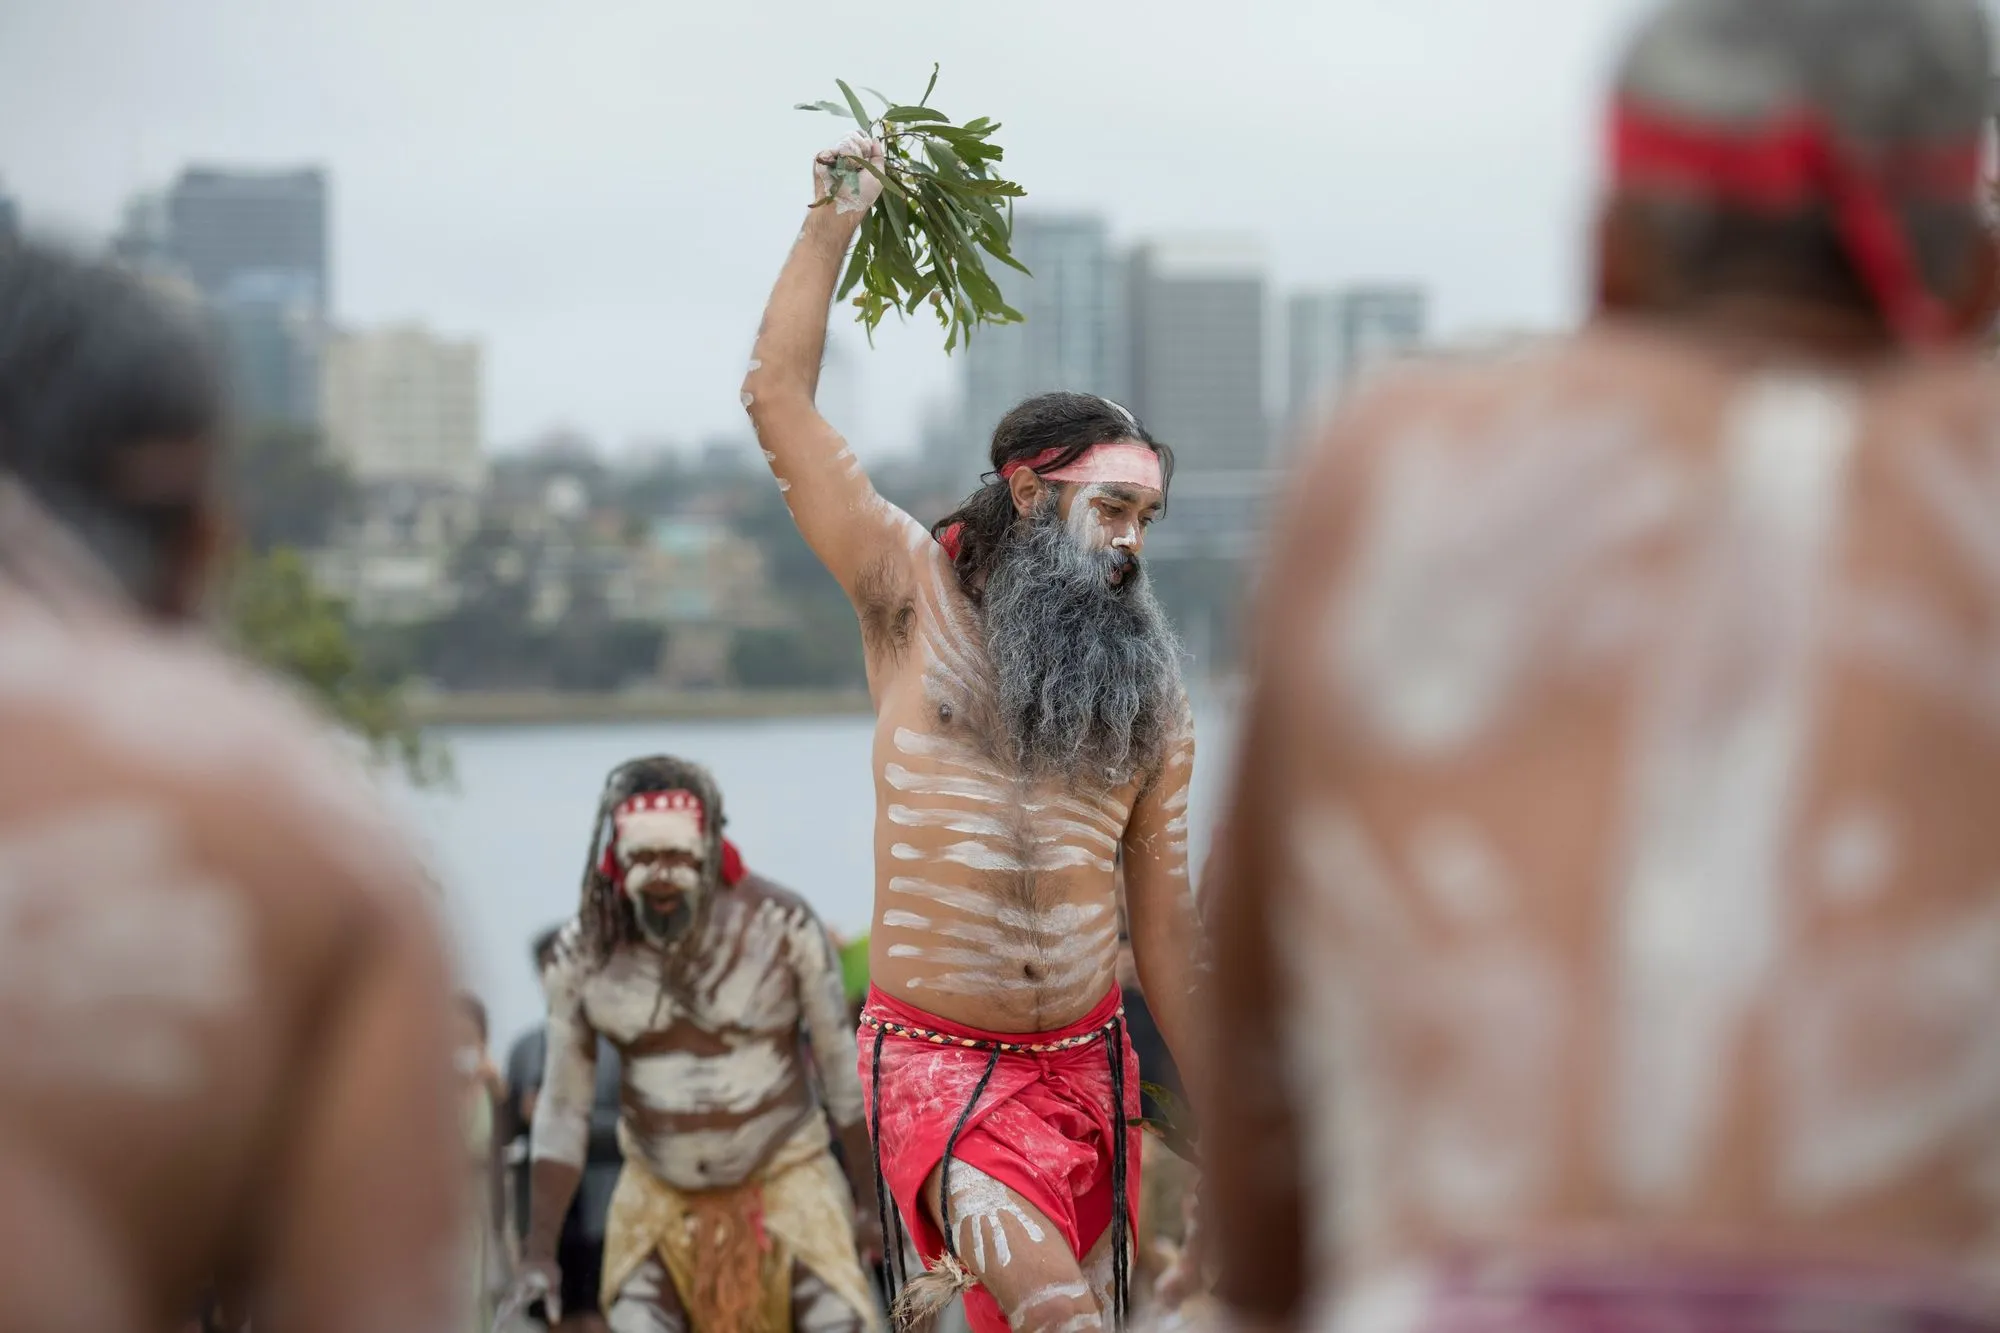 Welcome to Country and a smoking ceremony is performed
at the Wugulora Ceremony at Barangaroo in Sydney,
Australia, 2018.